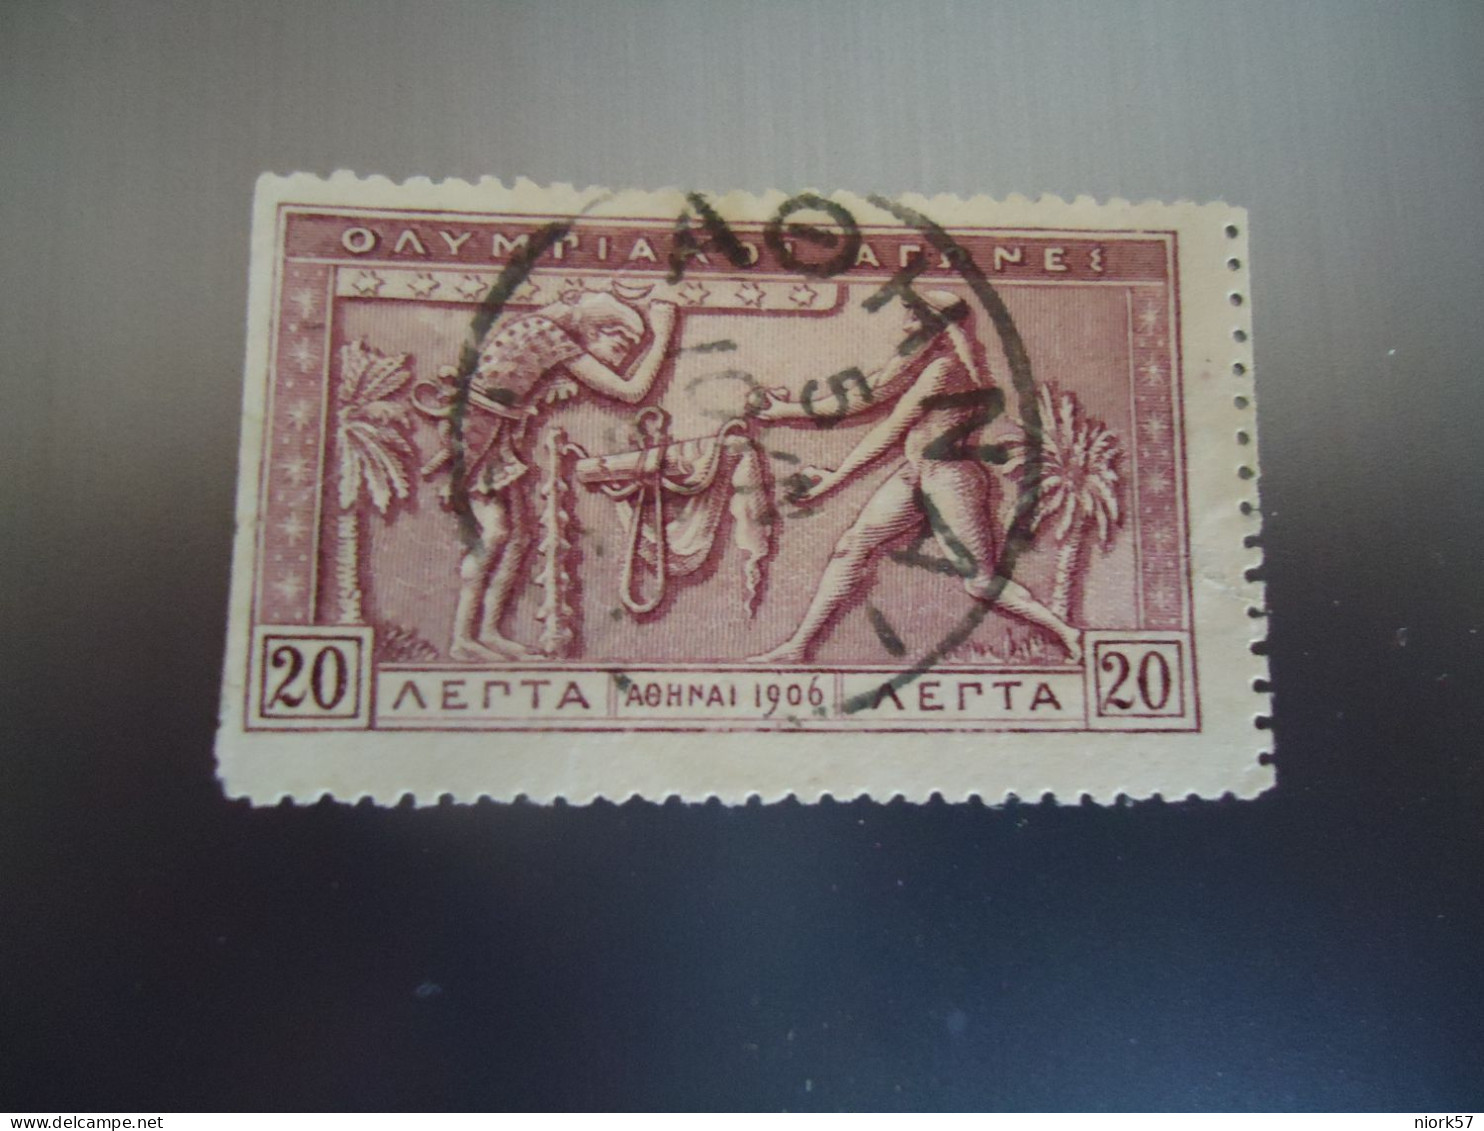 GREECE USED STAMPS OLYMPIC GAMES 1906   POSΤMARK  ΑΘΗΝΑ - Marcofilia - EMA ( Maquina De Huellas A Franquear)